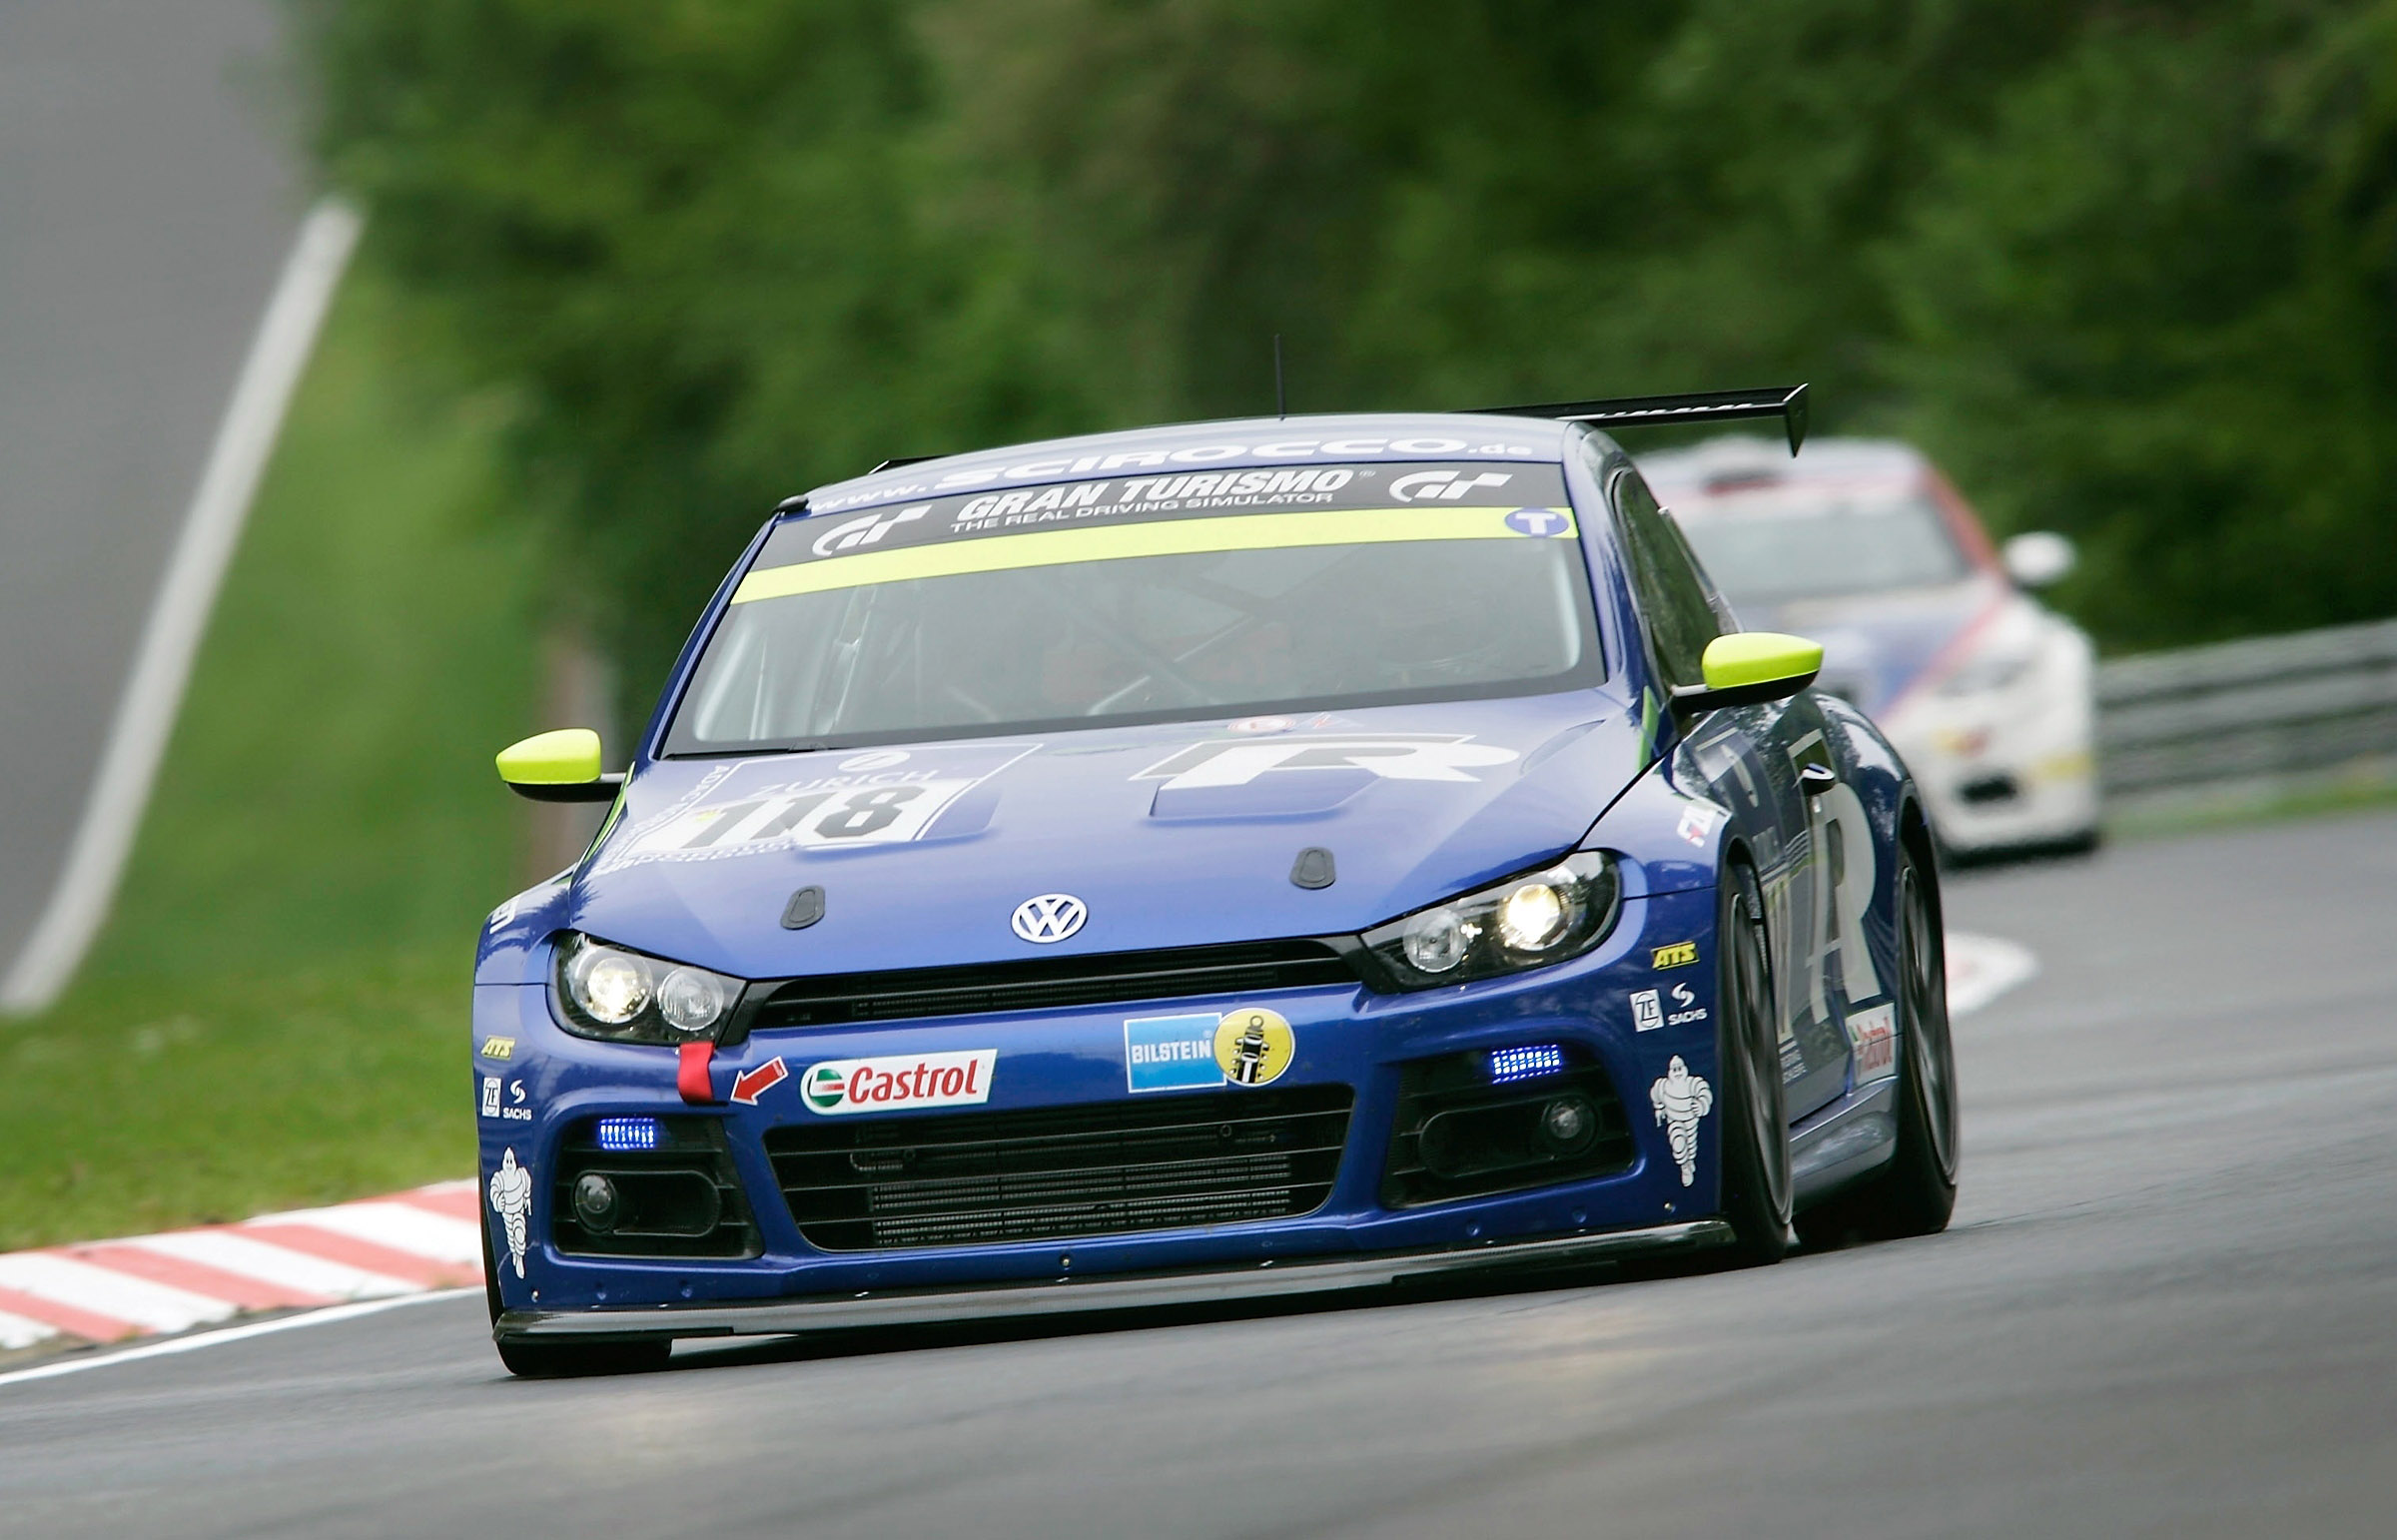 VW Scirocco GT24 at Nurburgring 24hrs